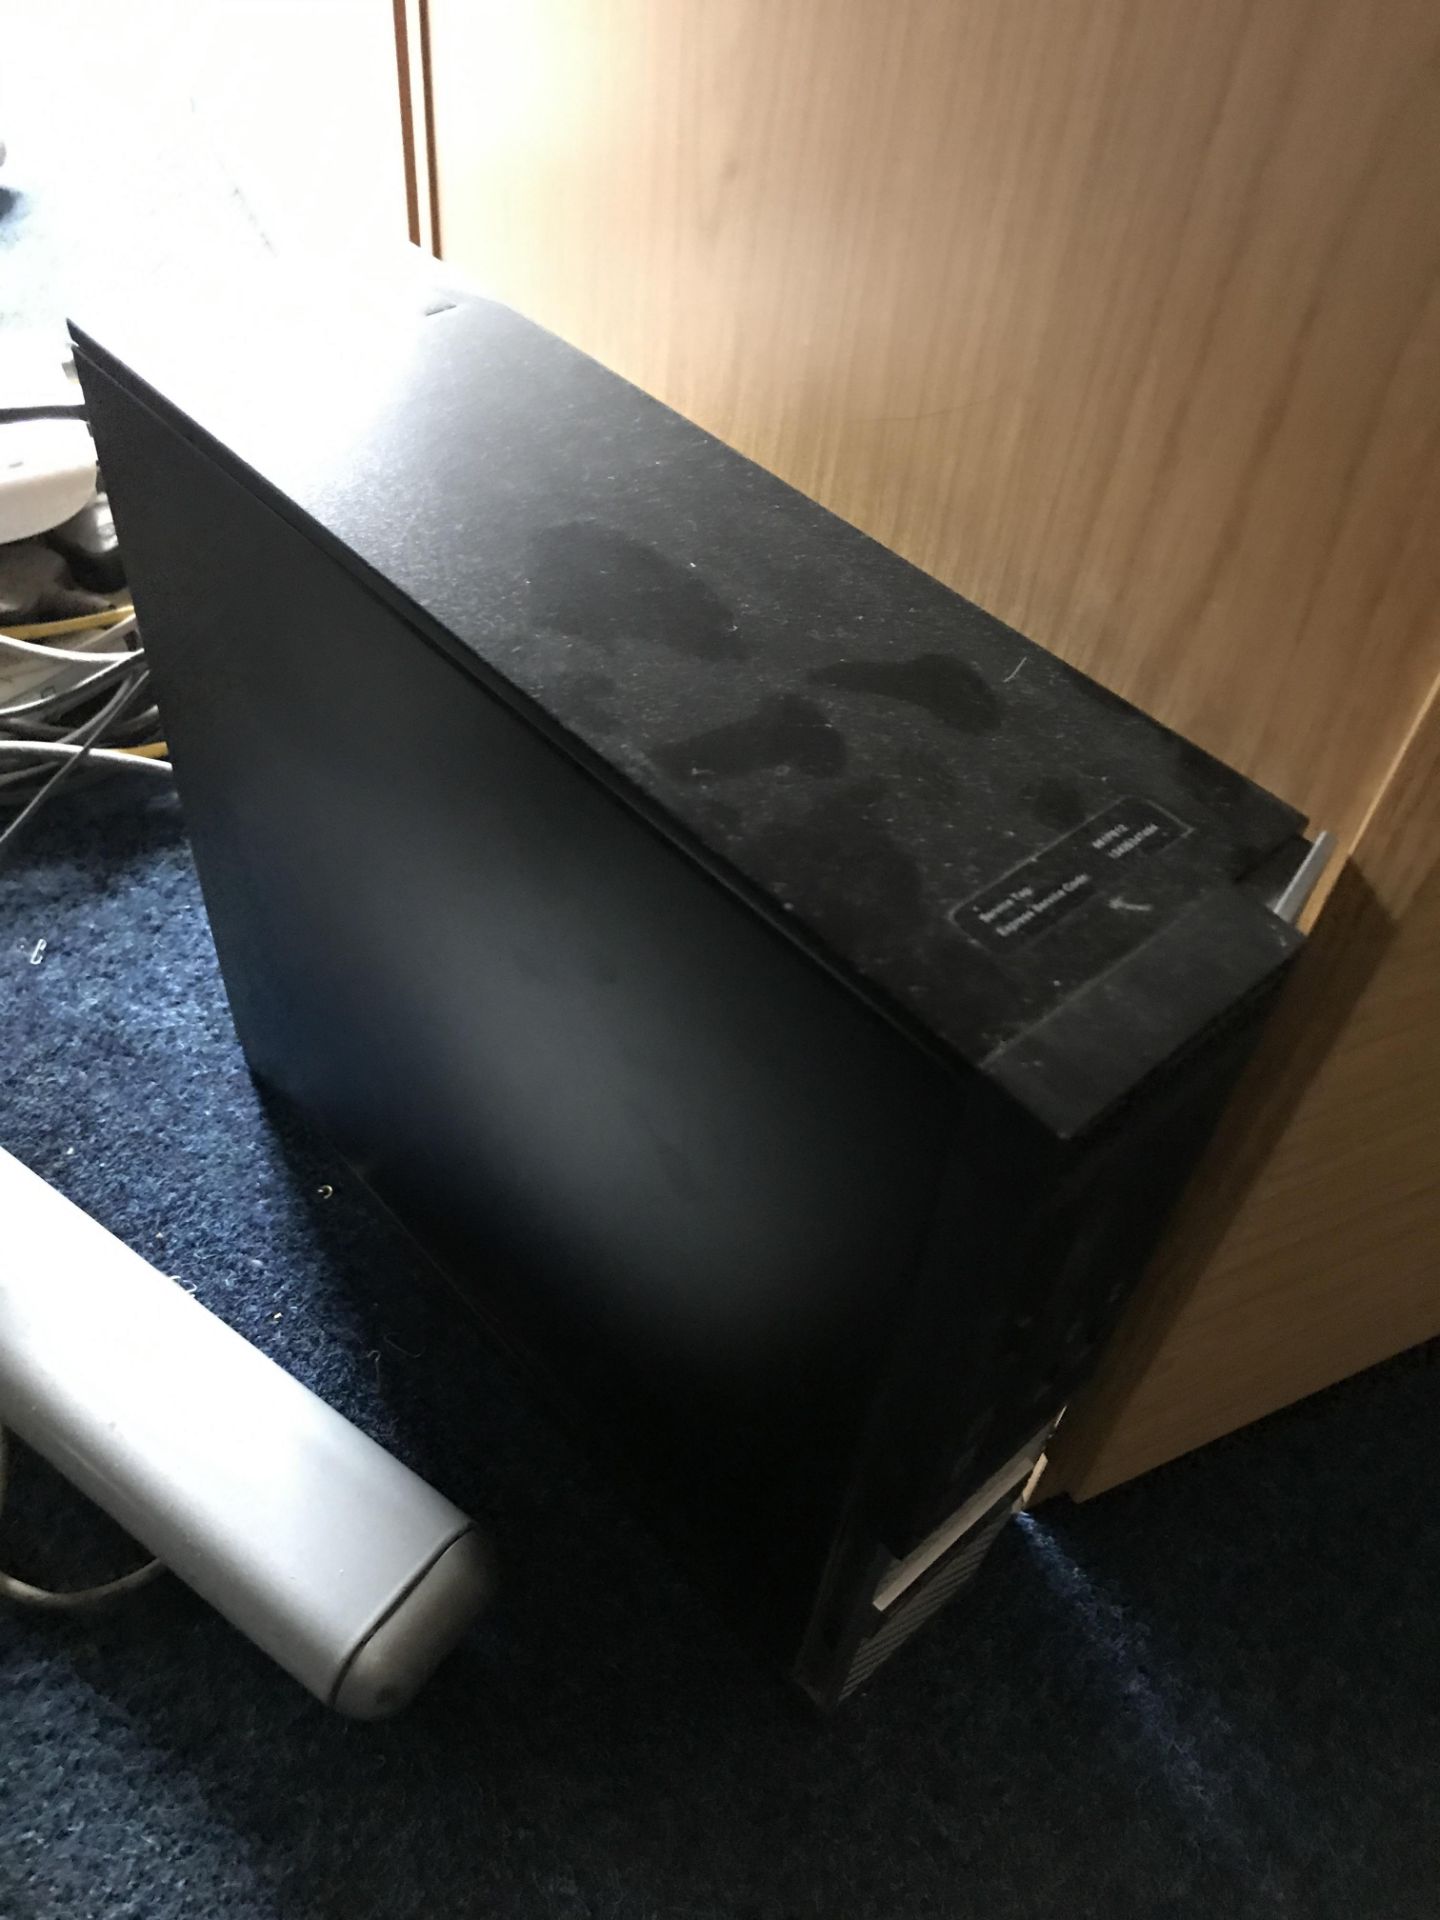 Dell Optiplex 3020 Intel Core i3 Personal Computer (hard disk removed), with flat screen monitor, - Bild 2 aus 3